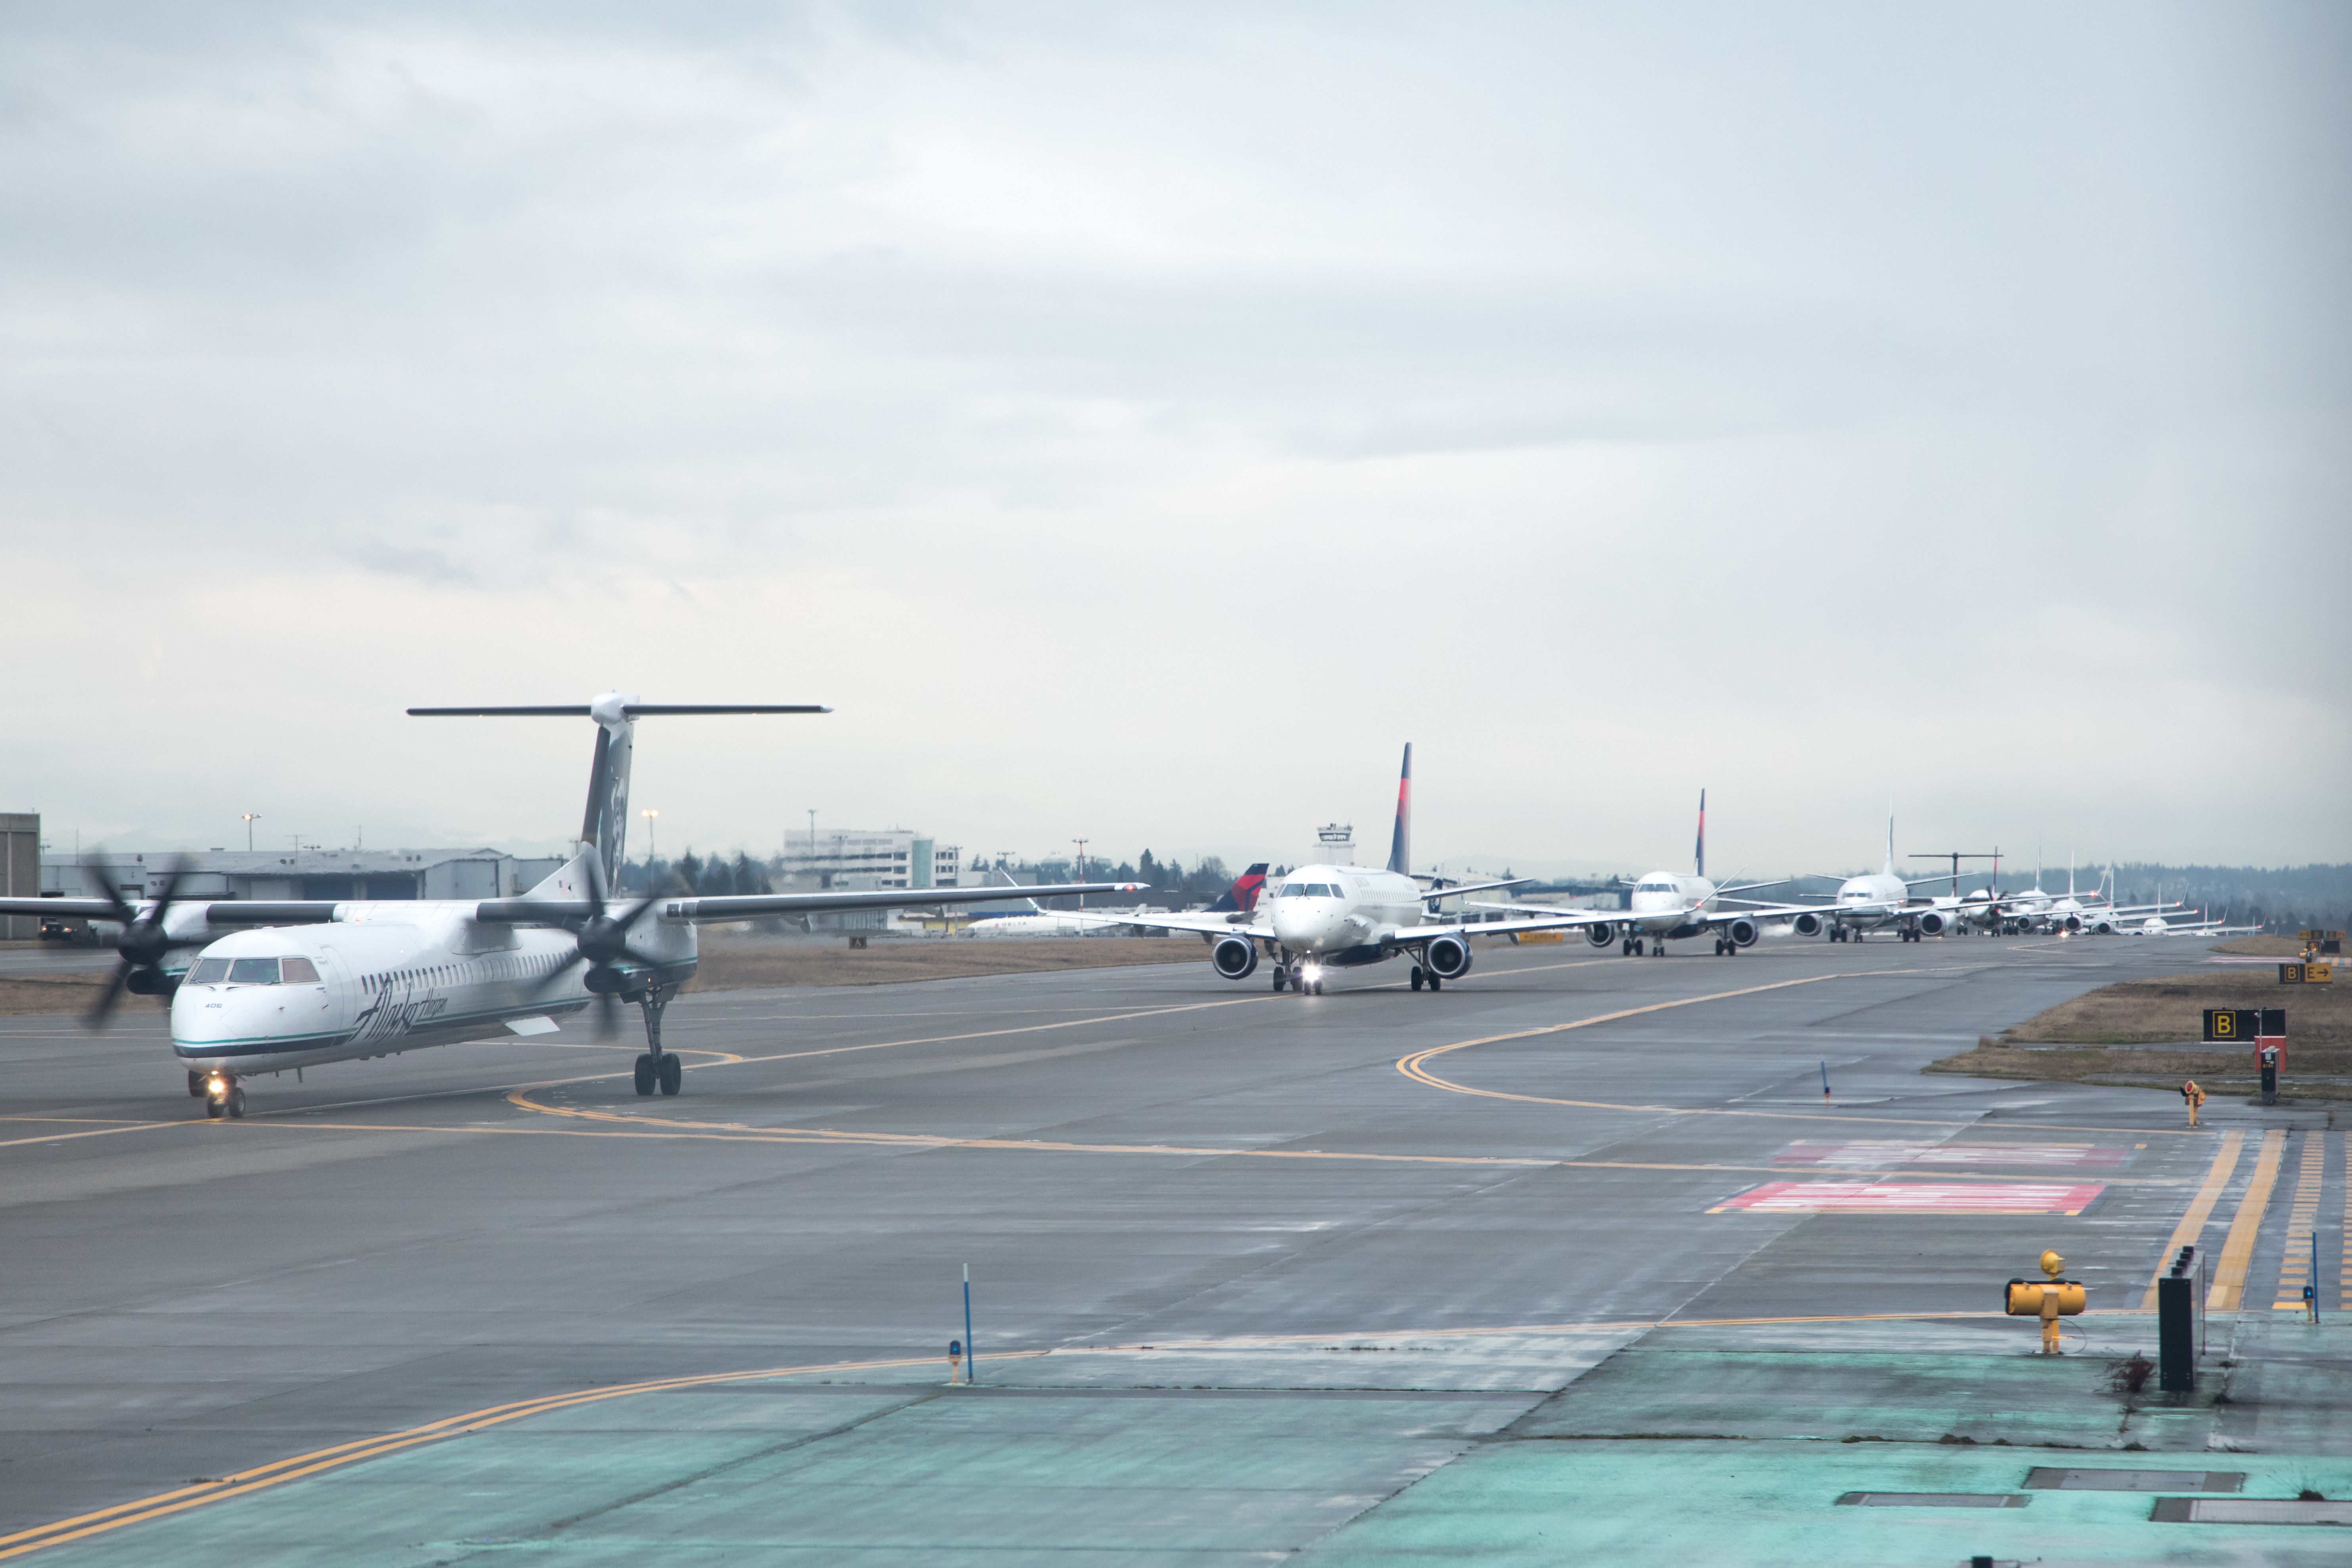 A long line of planes waiting to take off at Seattle.